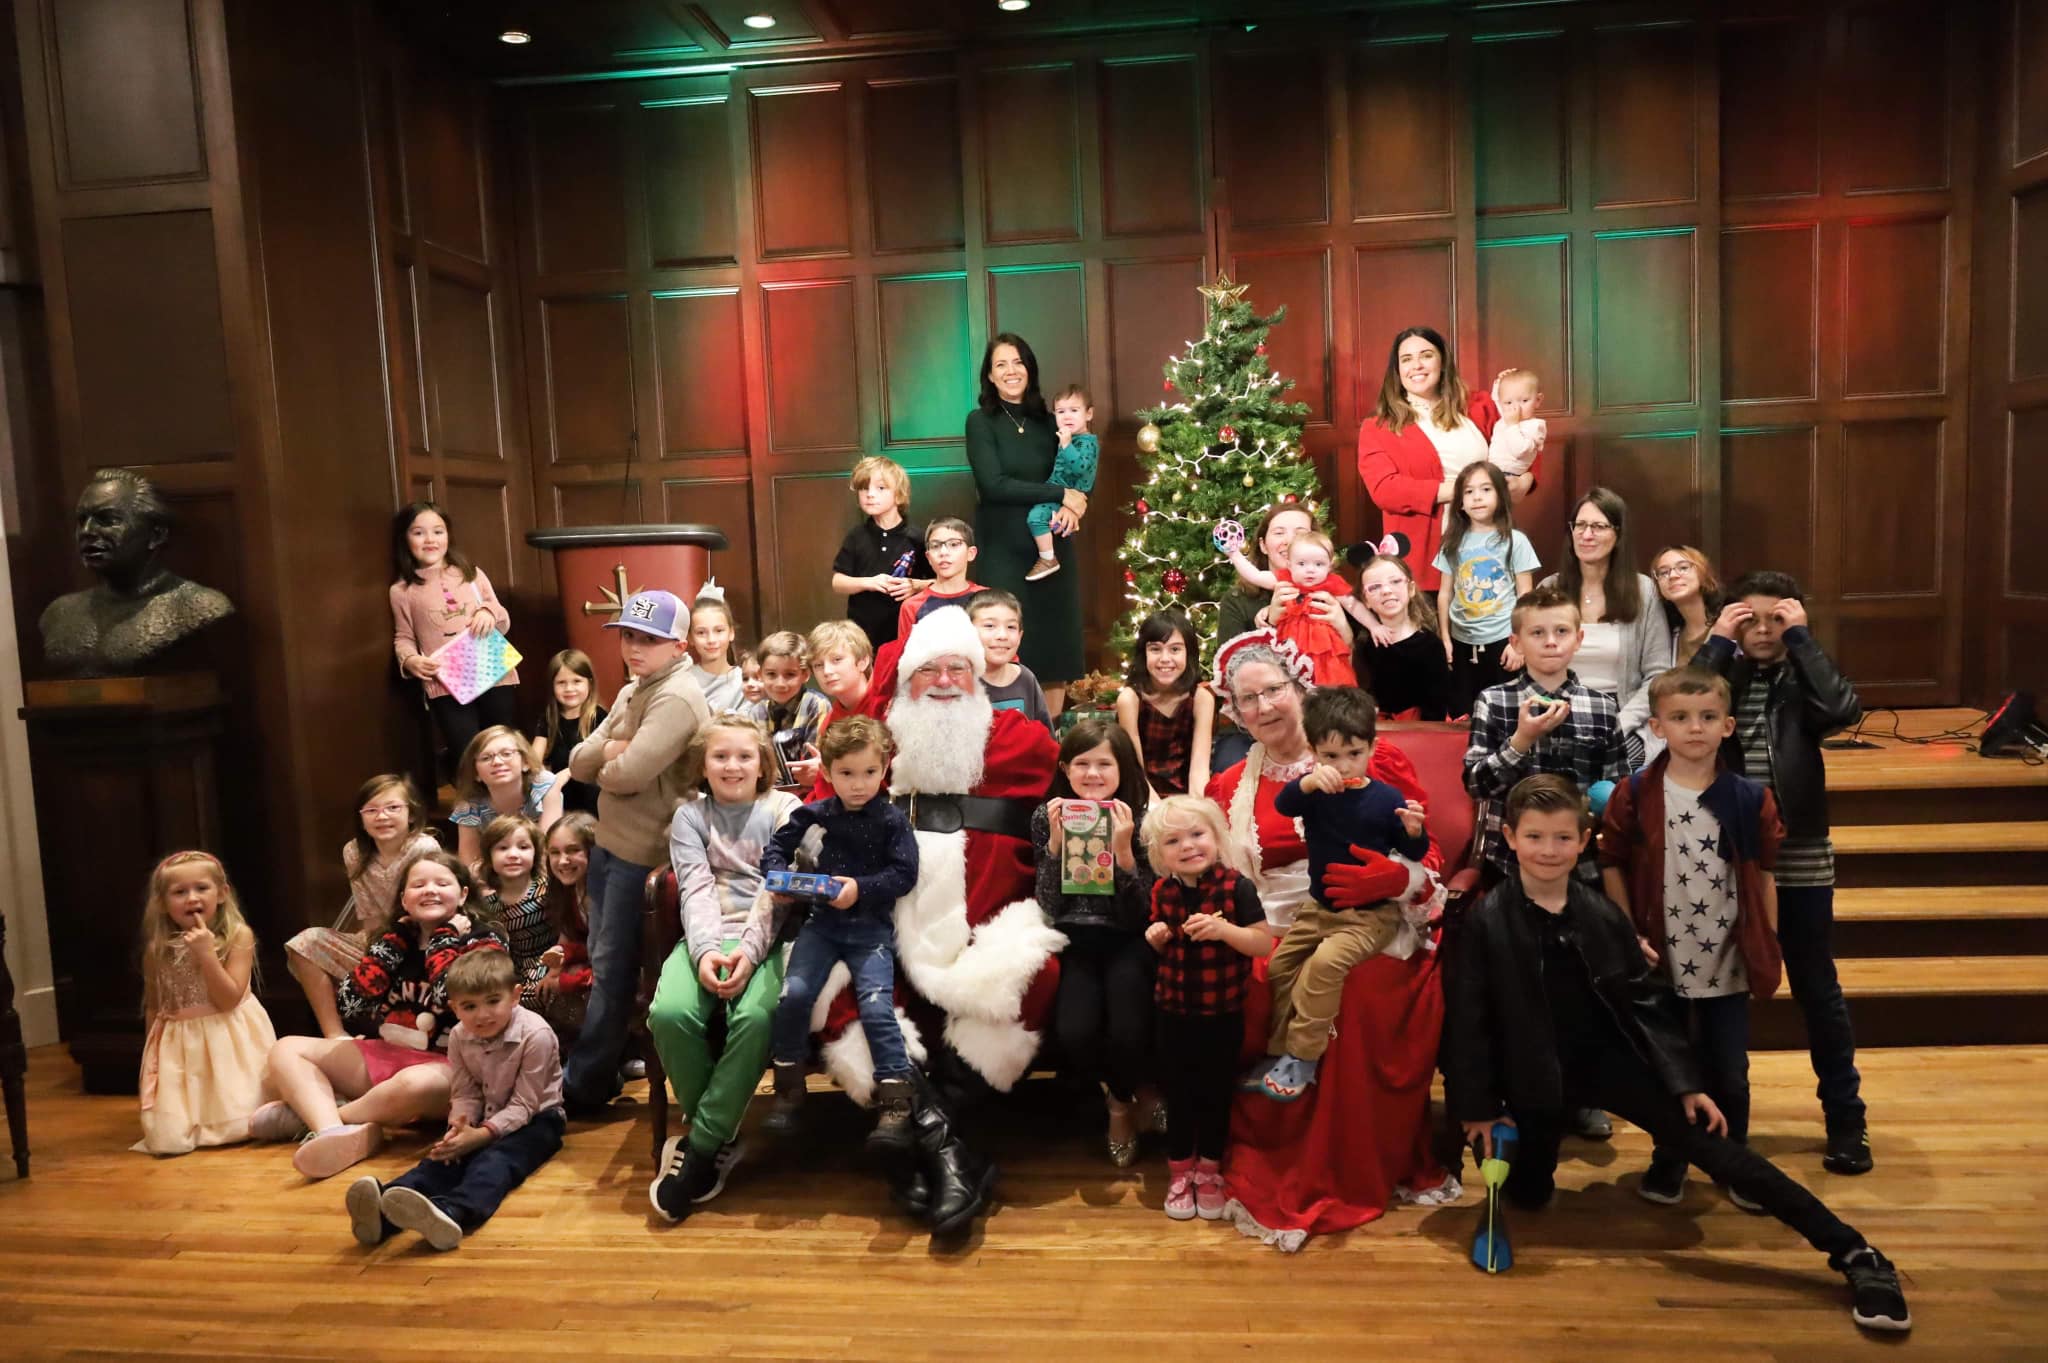 Church of Scientology Nashville to Host Christmas Potluck Open to All